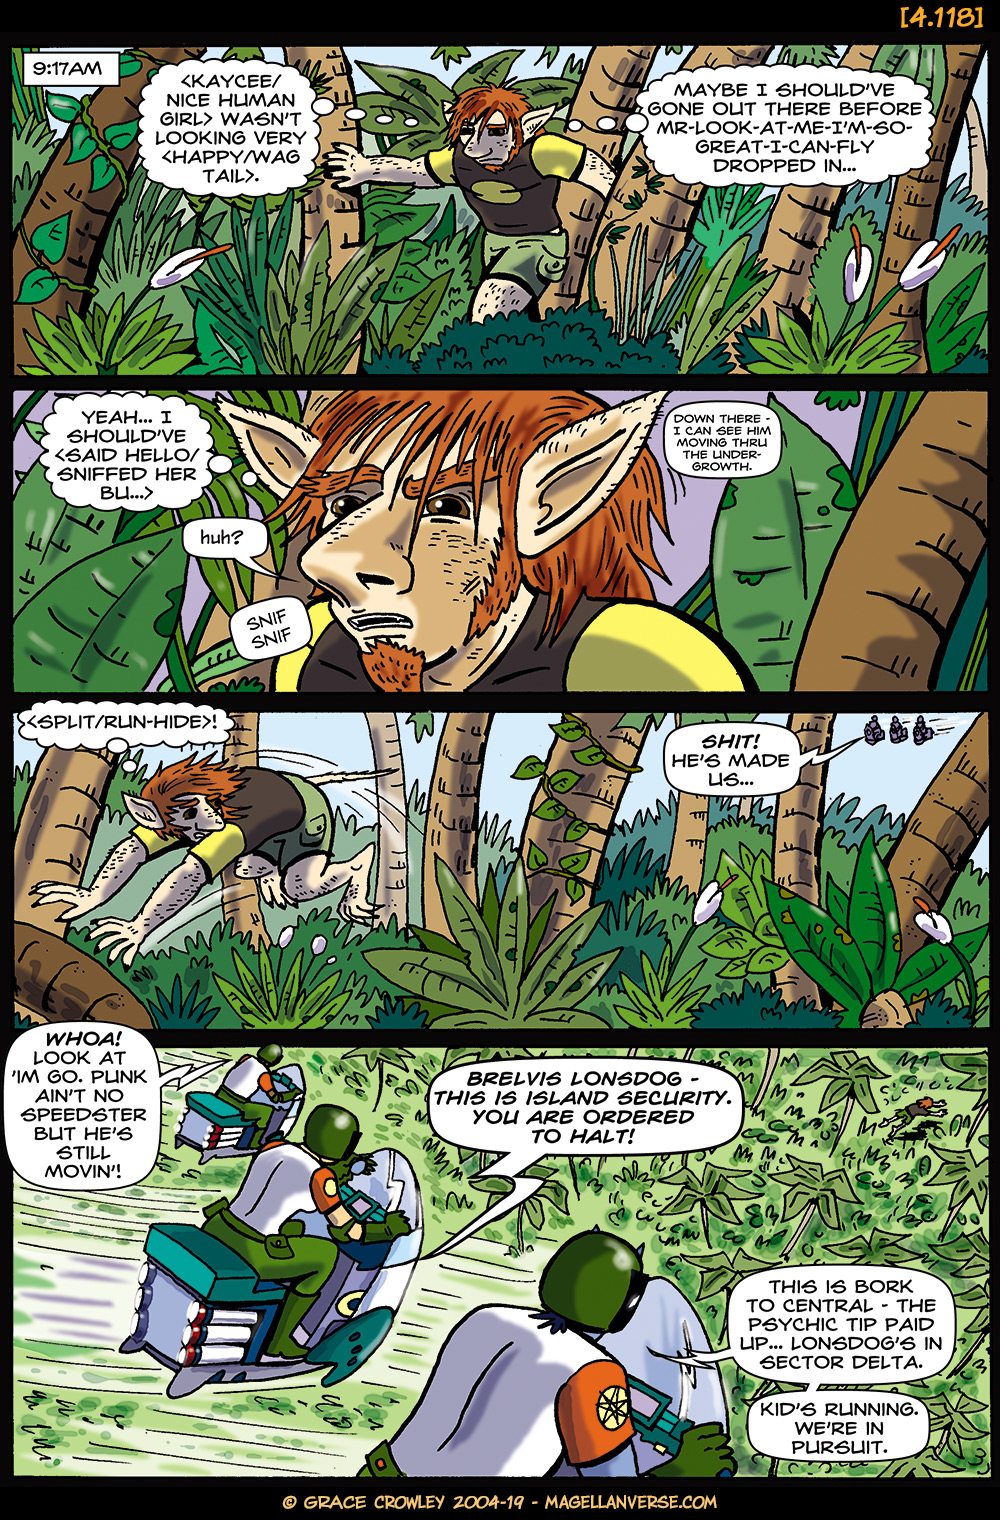 Page 4.118